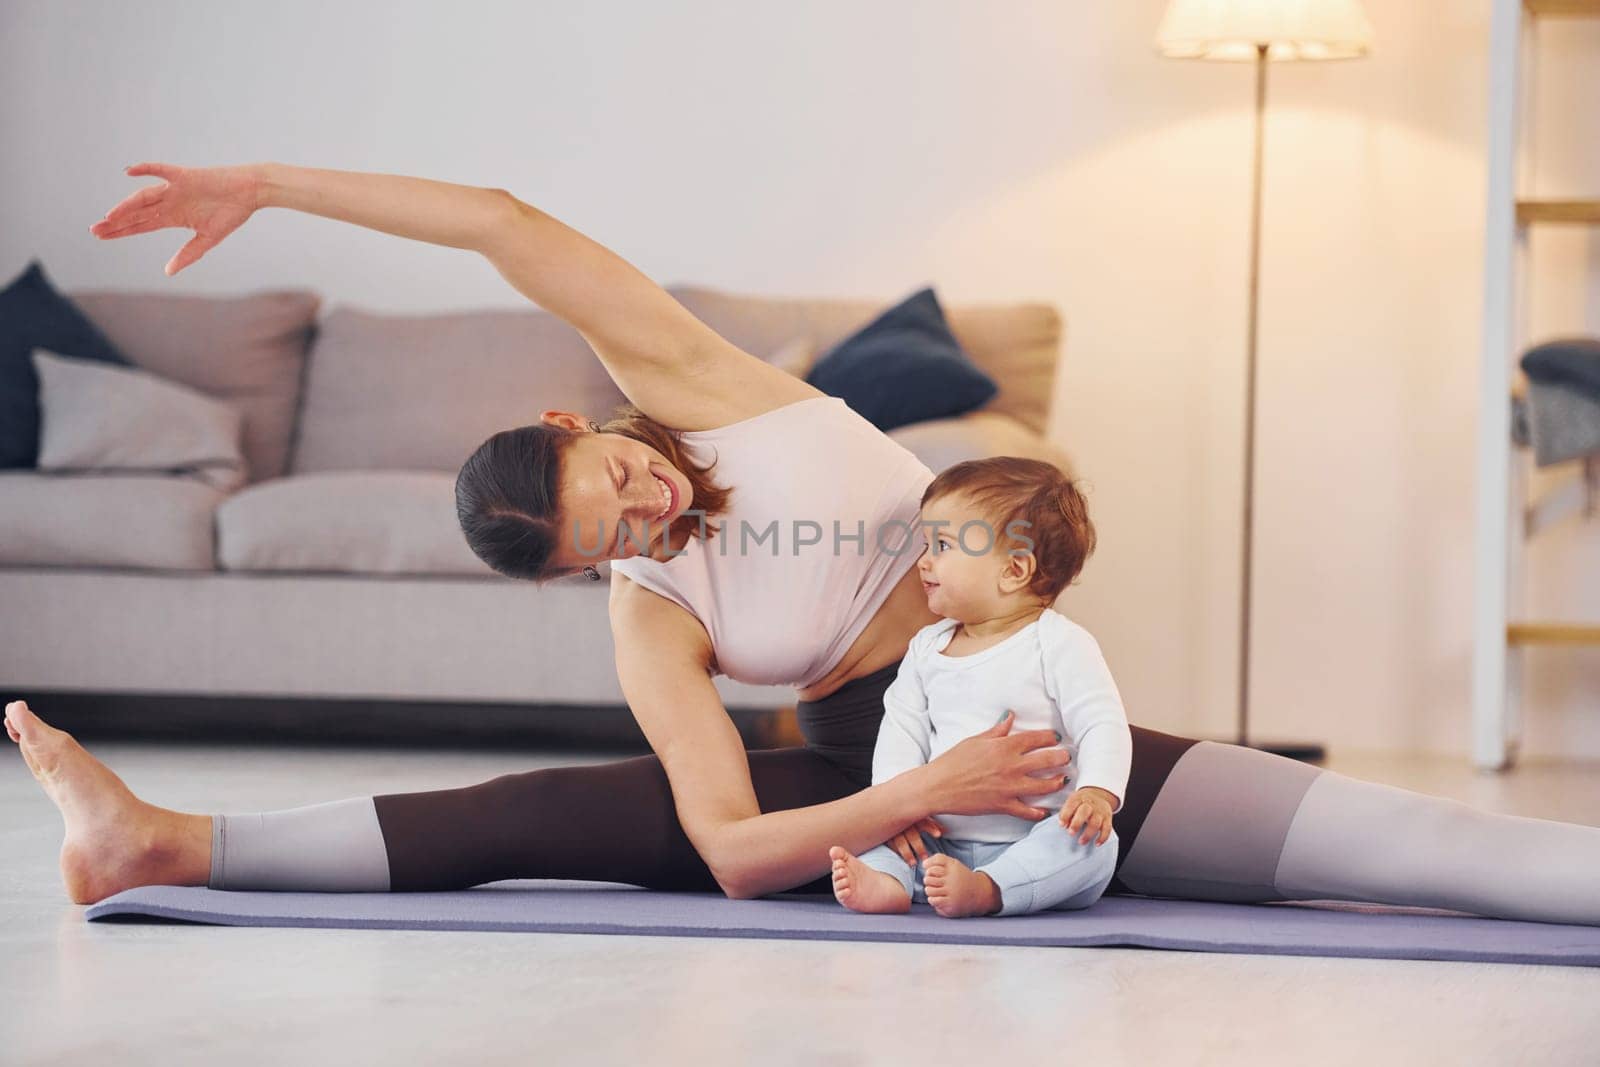 Teaching fitness. Mother with her little daughter is at home together.